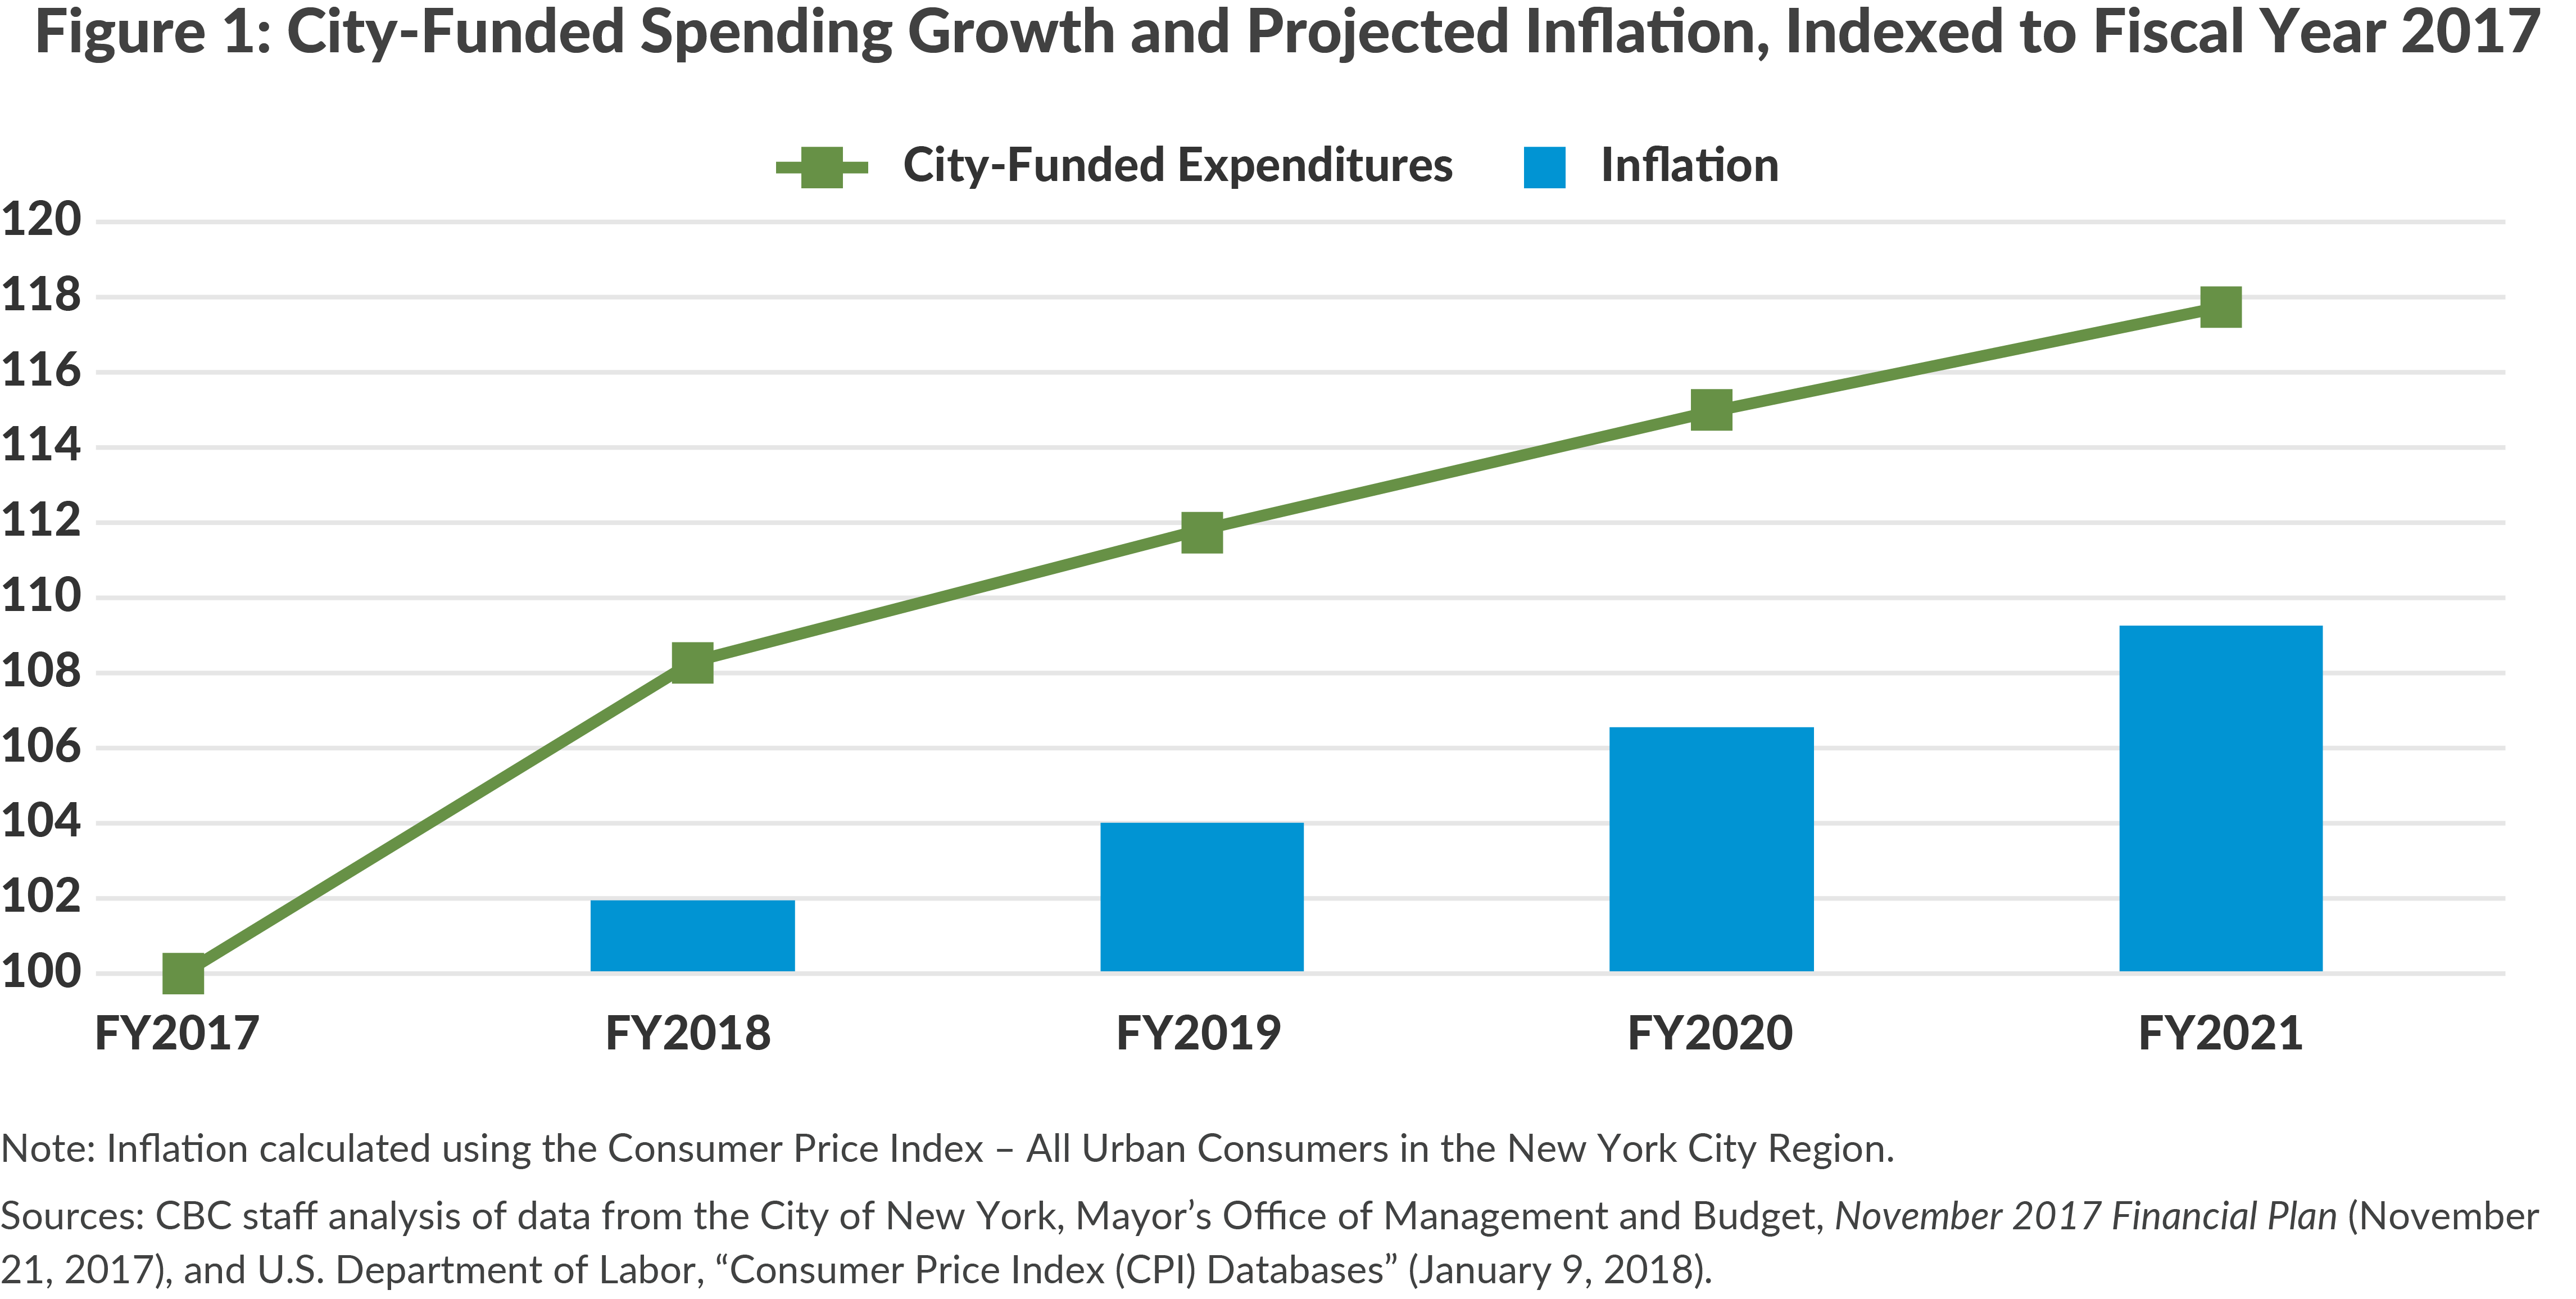 Figure 1: City-Funded Spending Growth and Projected Inflation, Indexed to Fiscal Year 2017